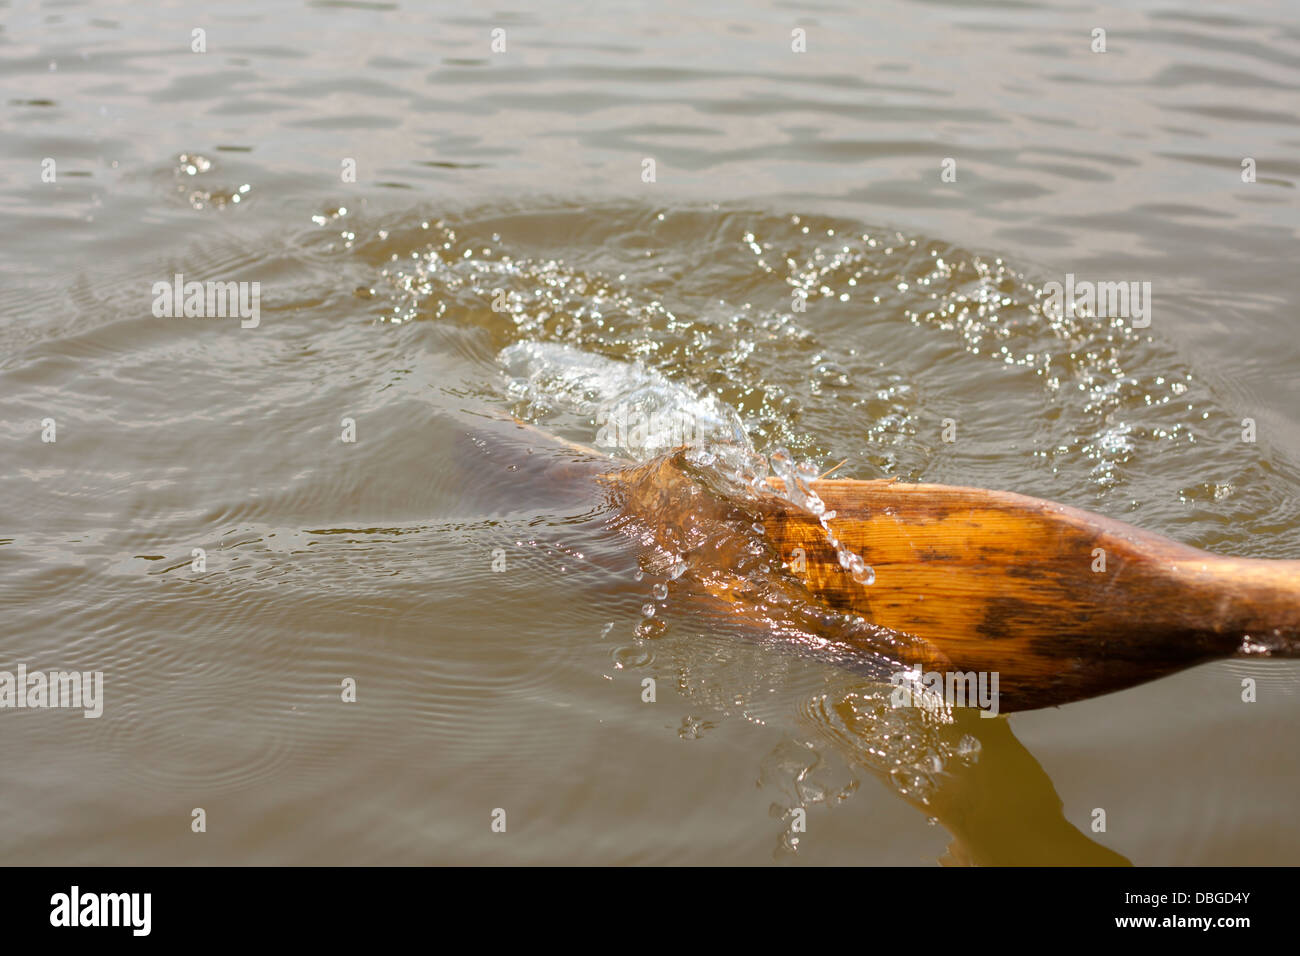 Oar in water from boat marine holiday background concept Stock Photo